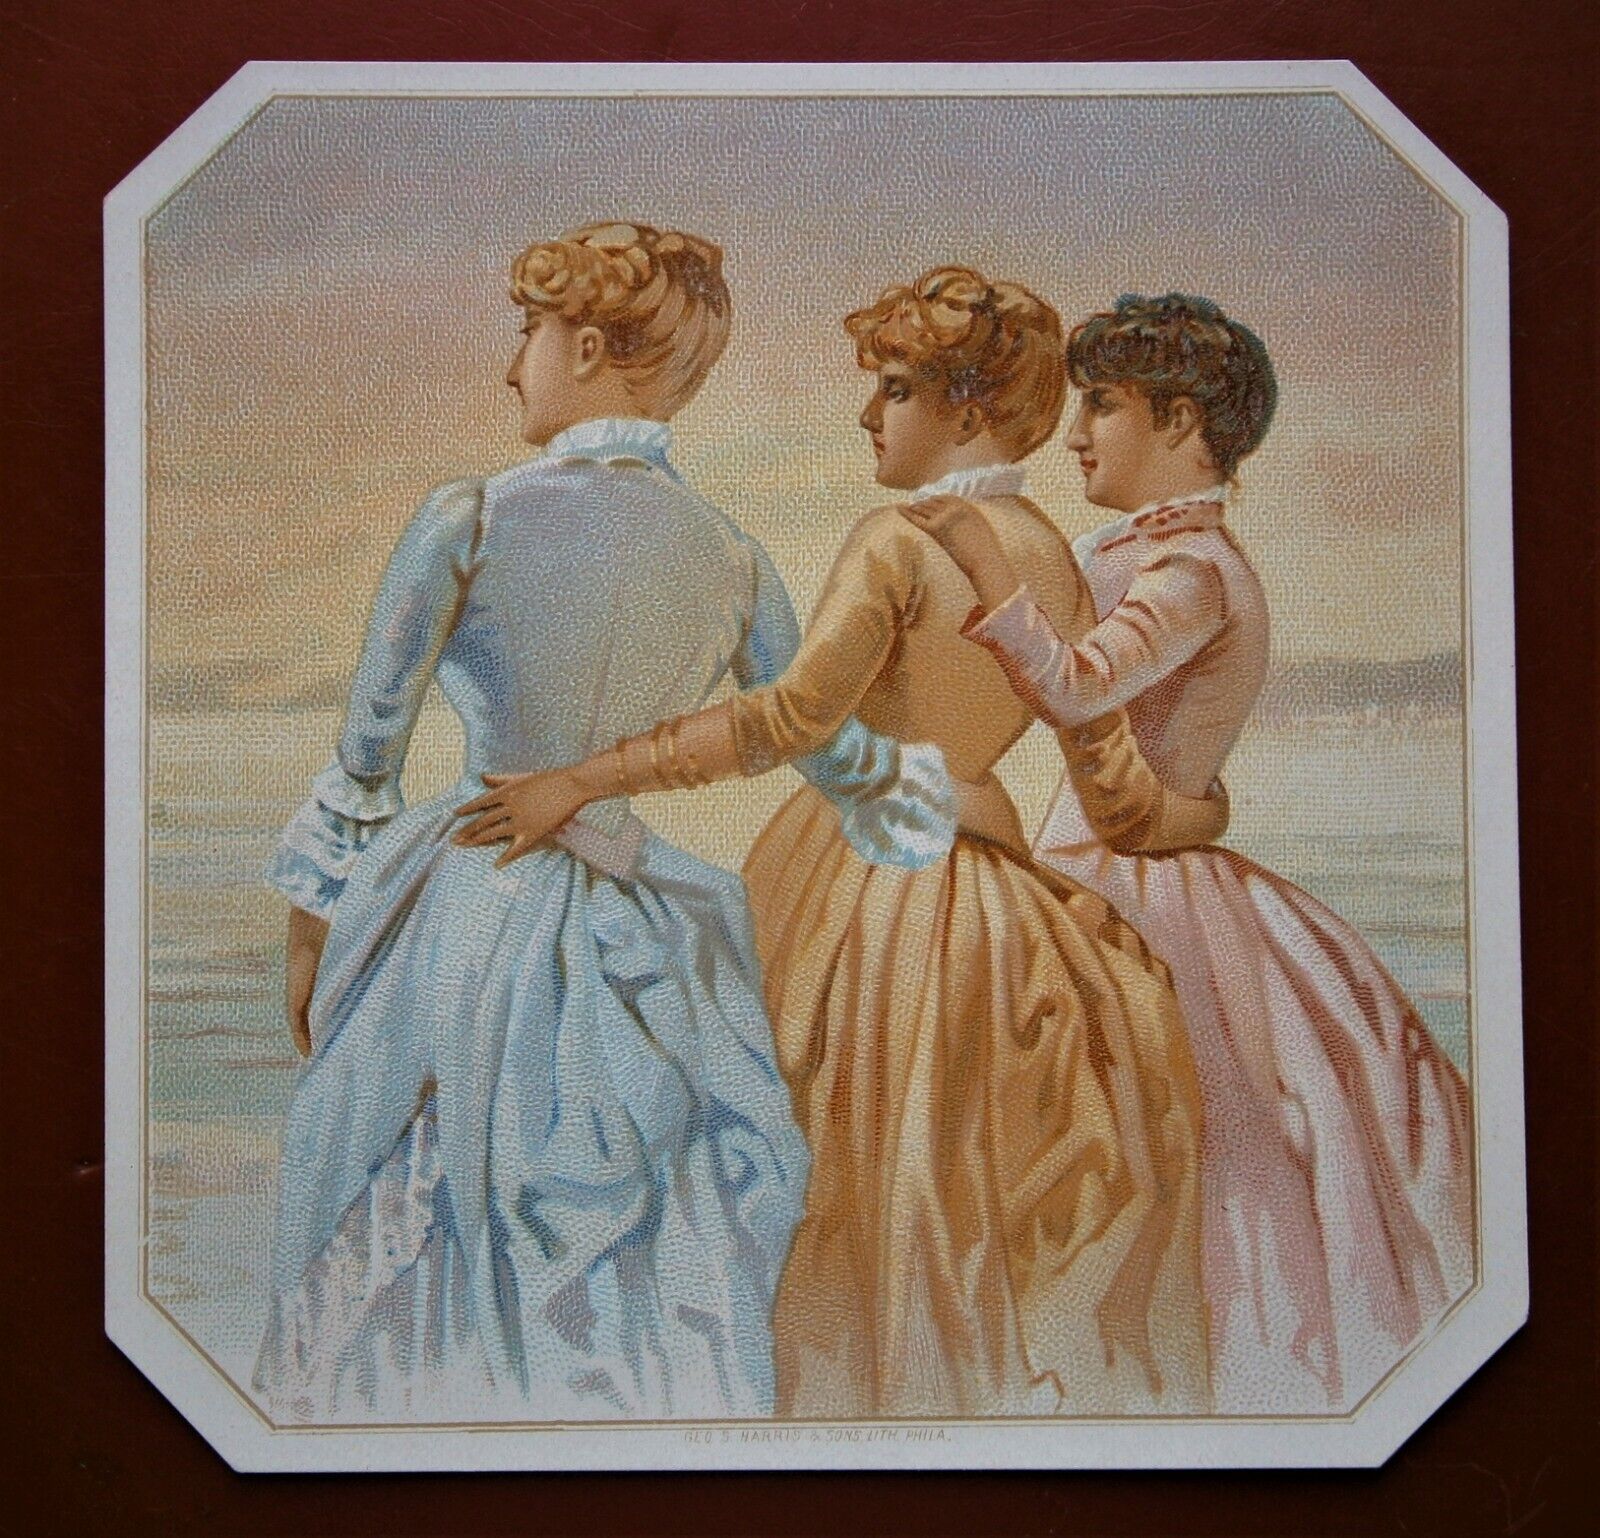 Generic Outer Cigar Label with Image of Three Young Women, from the early 1900's